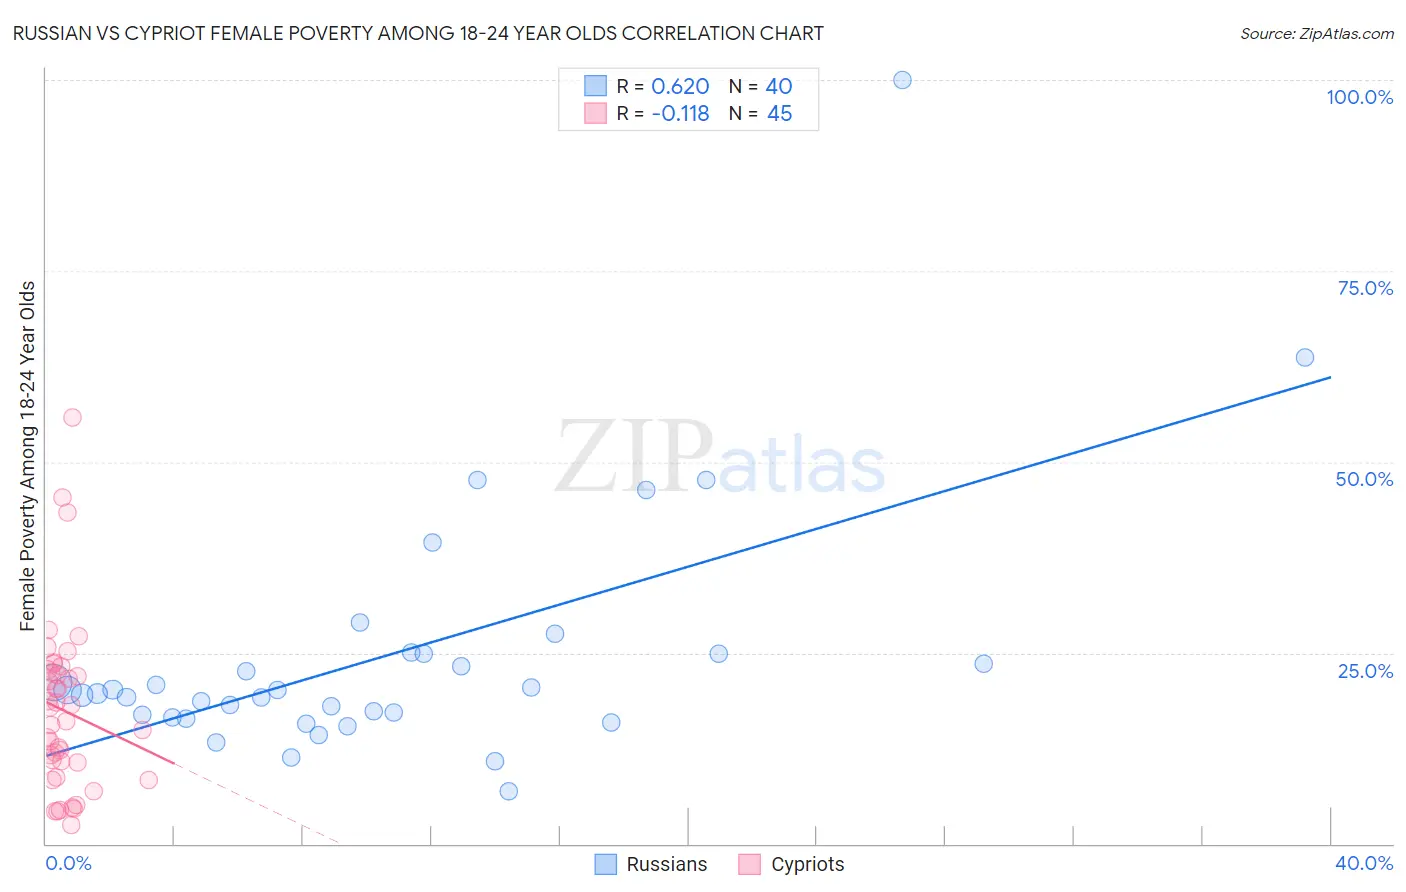 Russian vs Cypriot Female Poverty Among 18-24 Year Olds